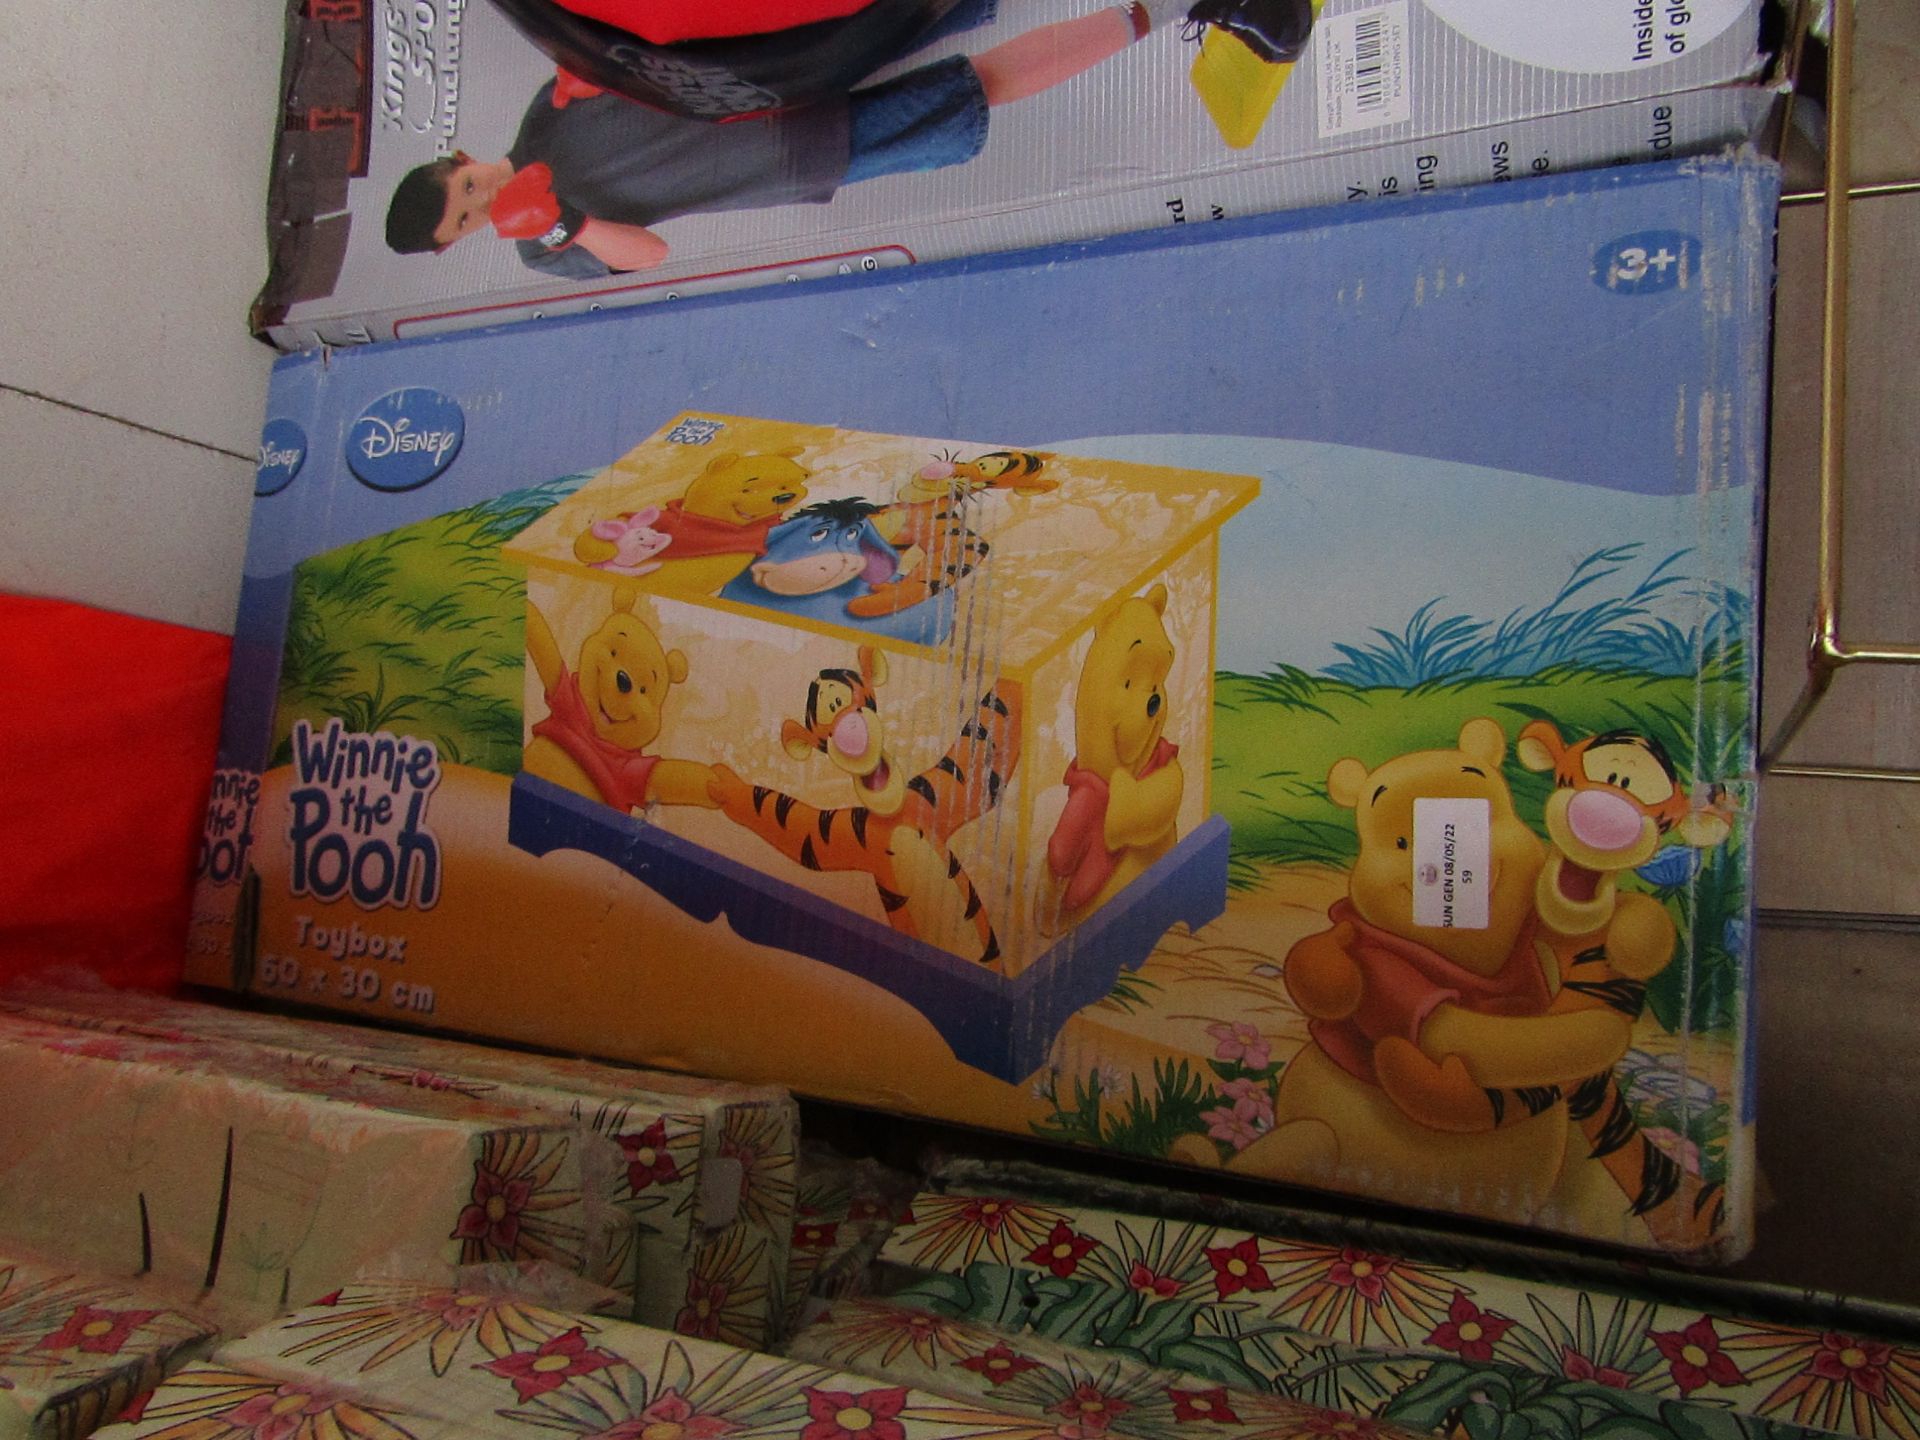 Disney - Winnie The Pooh ToyBox ( 60x30cm ) - Unchecked & Boxed.